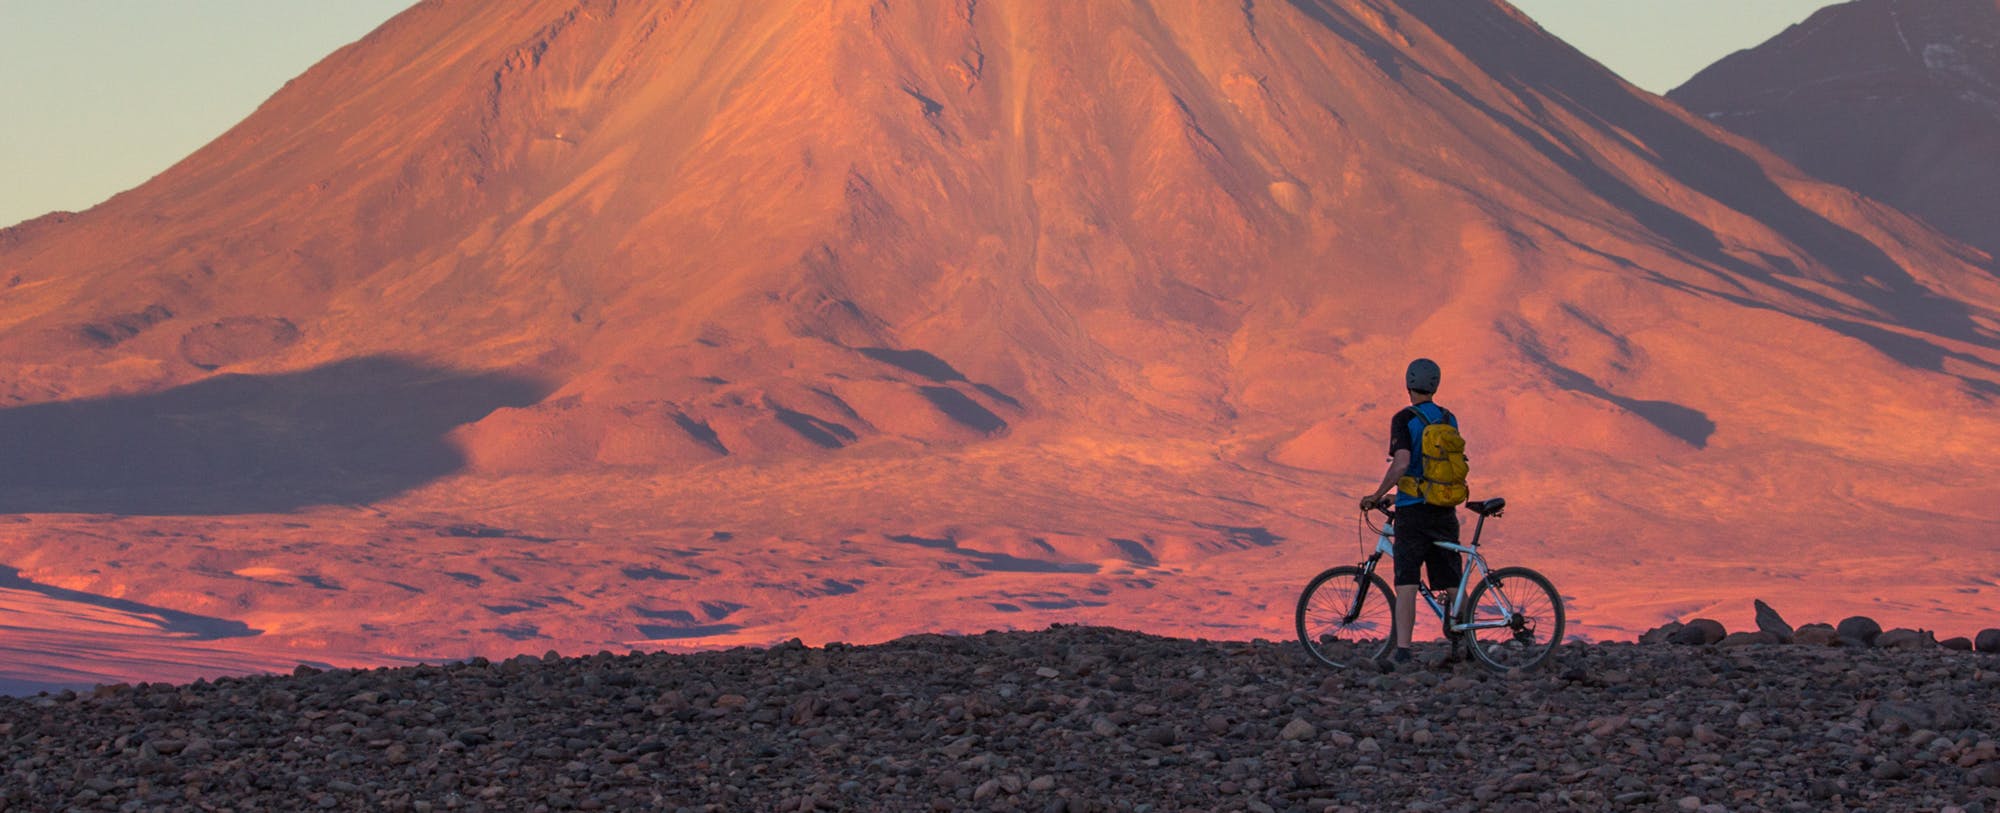 5 Of The Best Mountain Bike Rides In Atacama, Chile